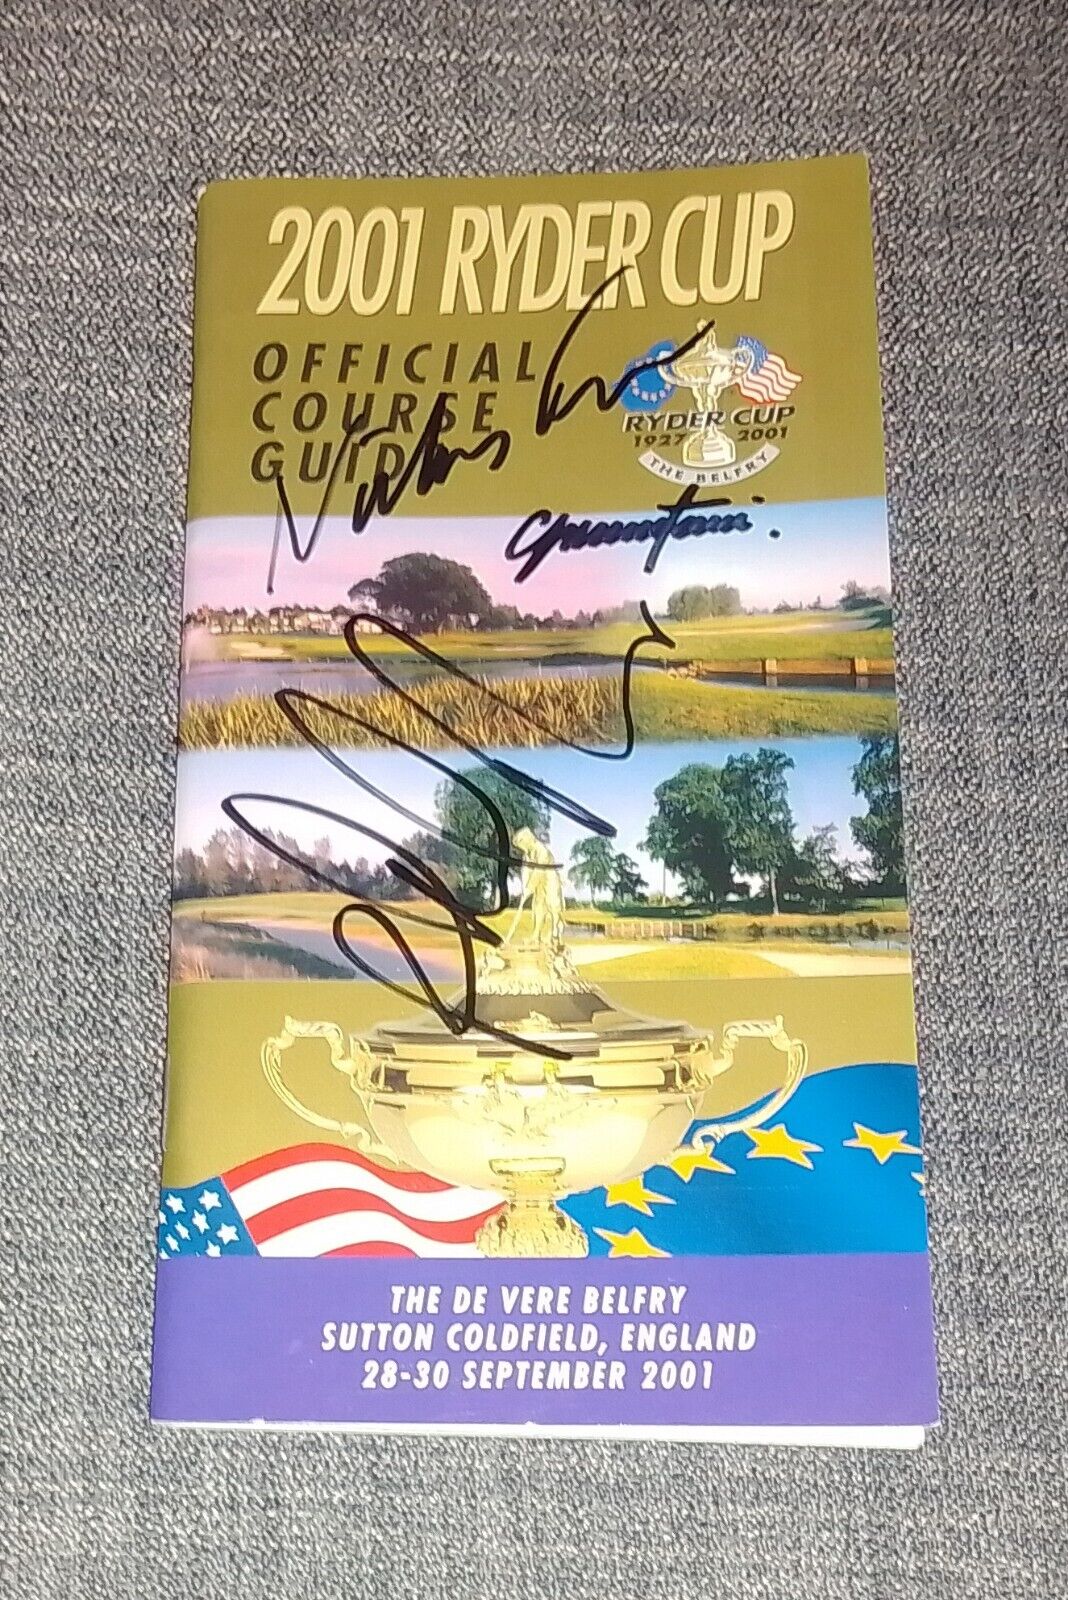 2001 Ryder cup course guide (Cancelled Event)  Due to 9/11 signed 